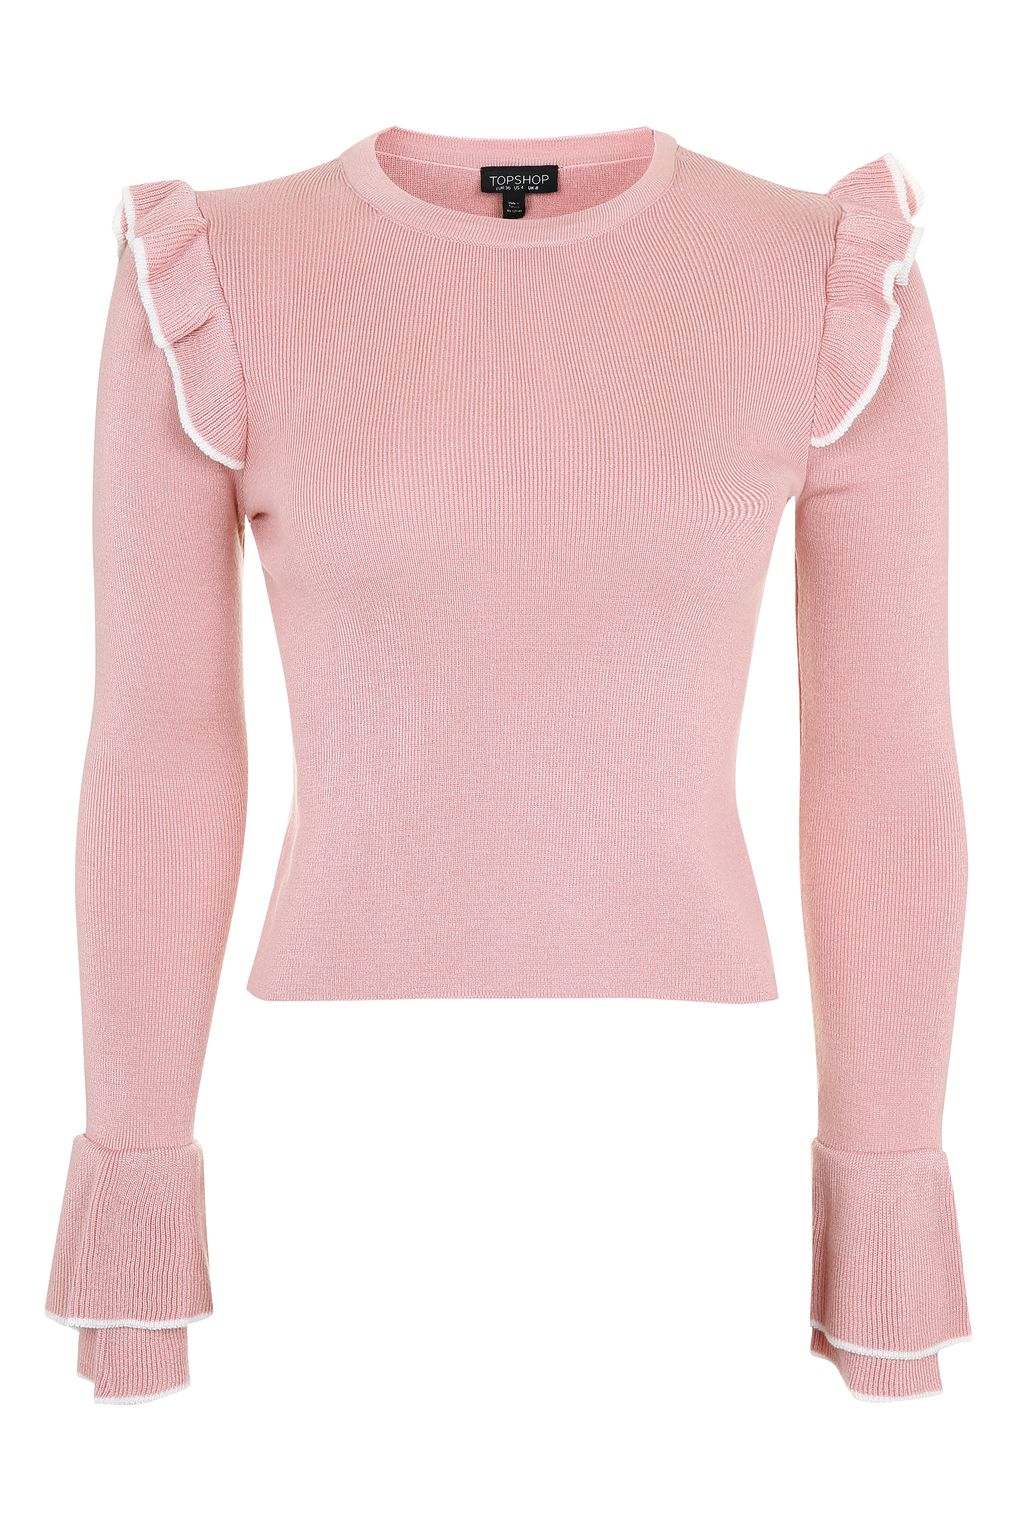 Topshop Tipped Frill Crop Knitted Top